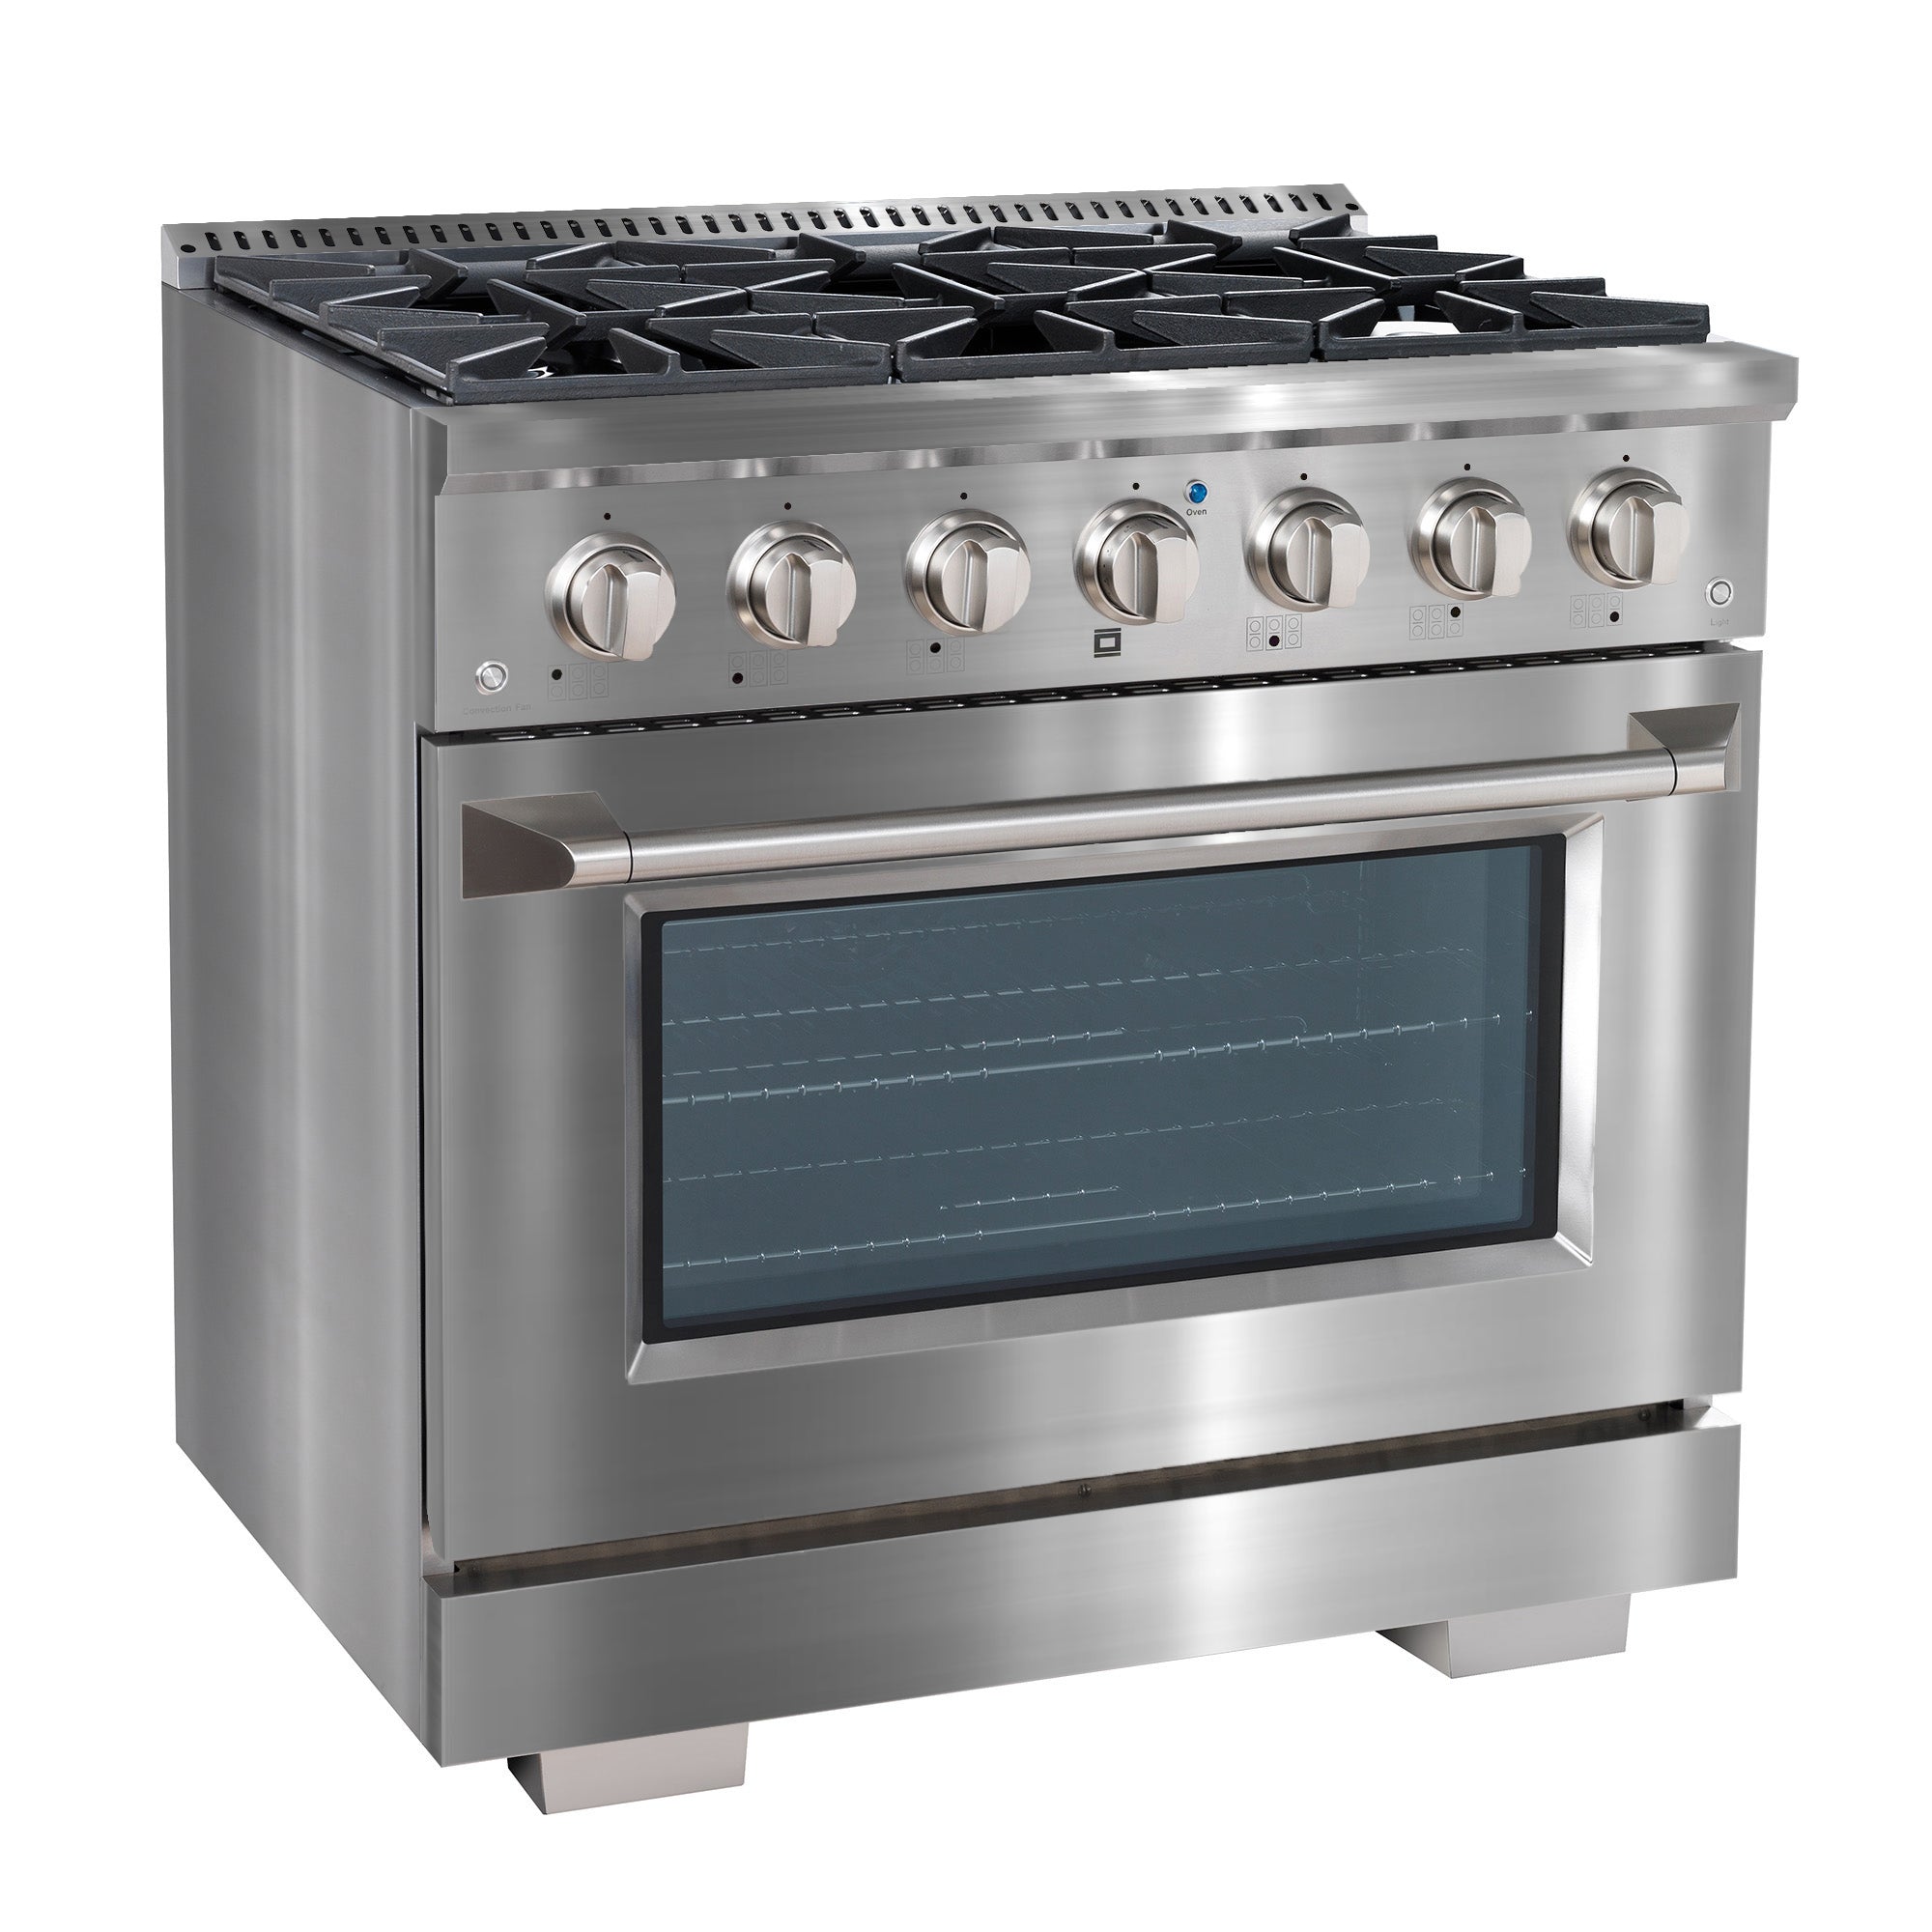 Ancona 36” 5.2 cu. ft. Dual Fuel Range with 6 Burners and Convection Oven in Stainless Steel